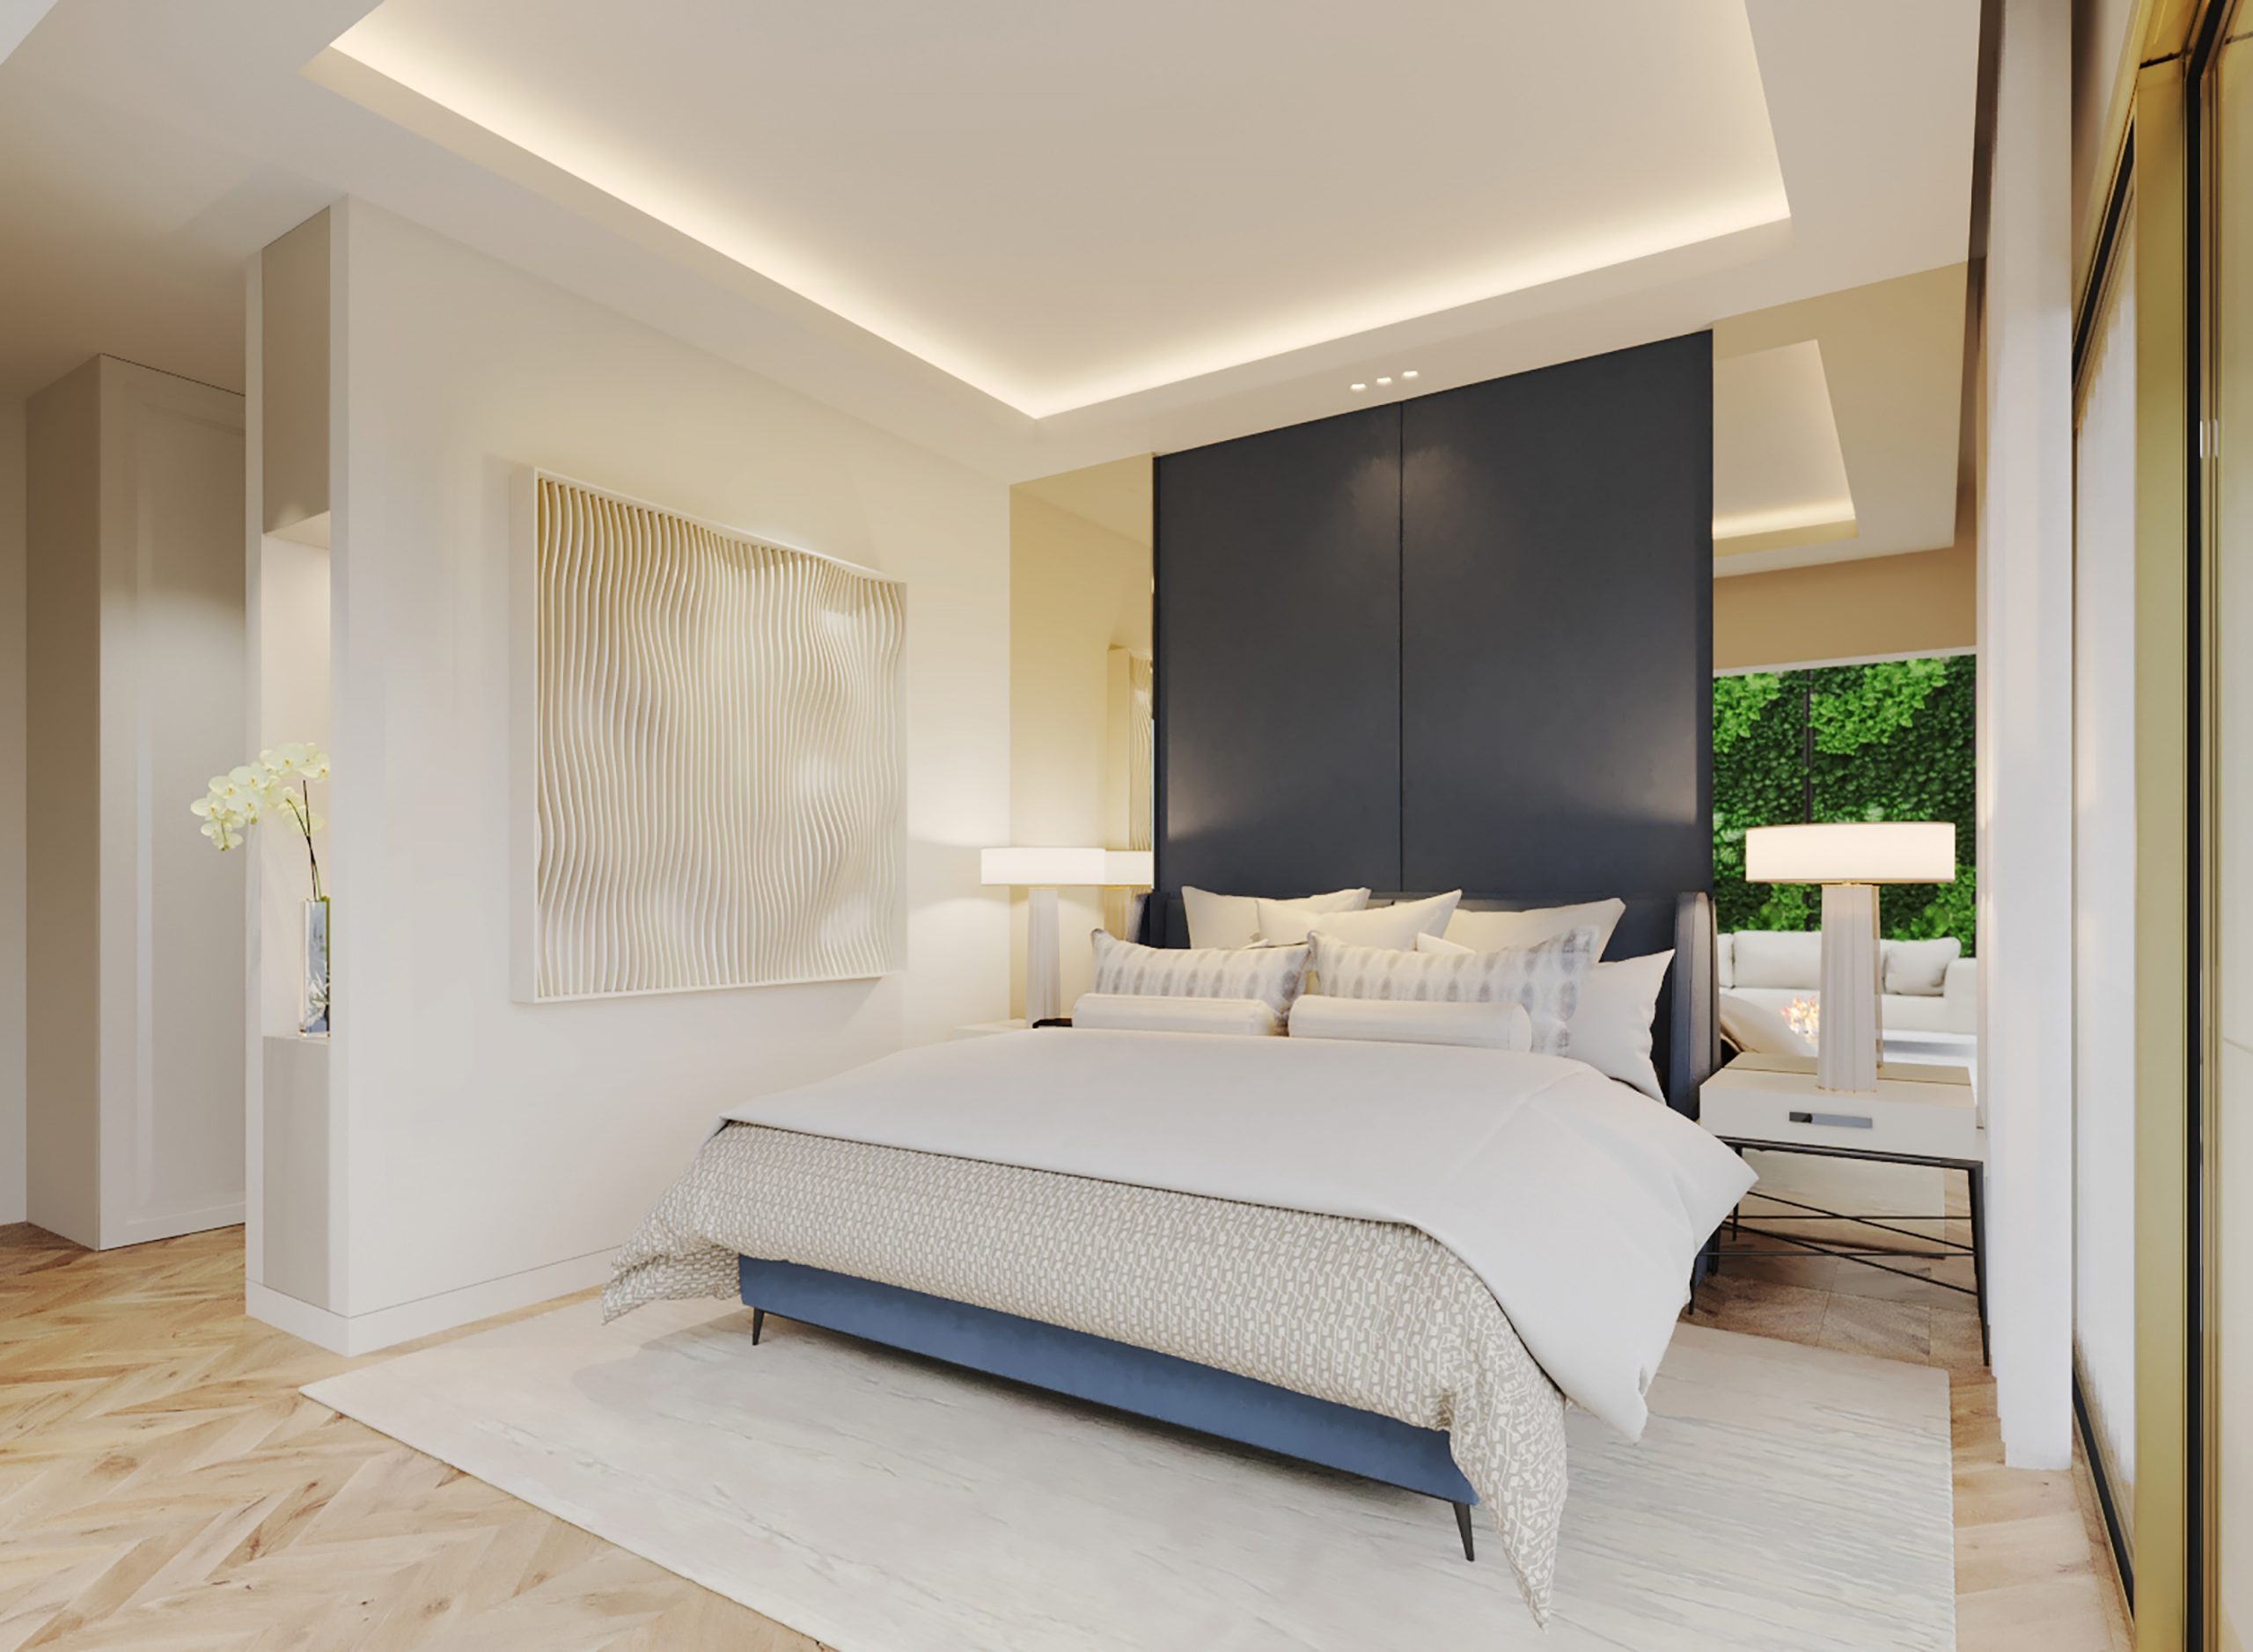 Legacy Townhouses Master Suite 3 By Gavinho Scaled, Design Authority